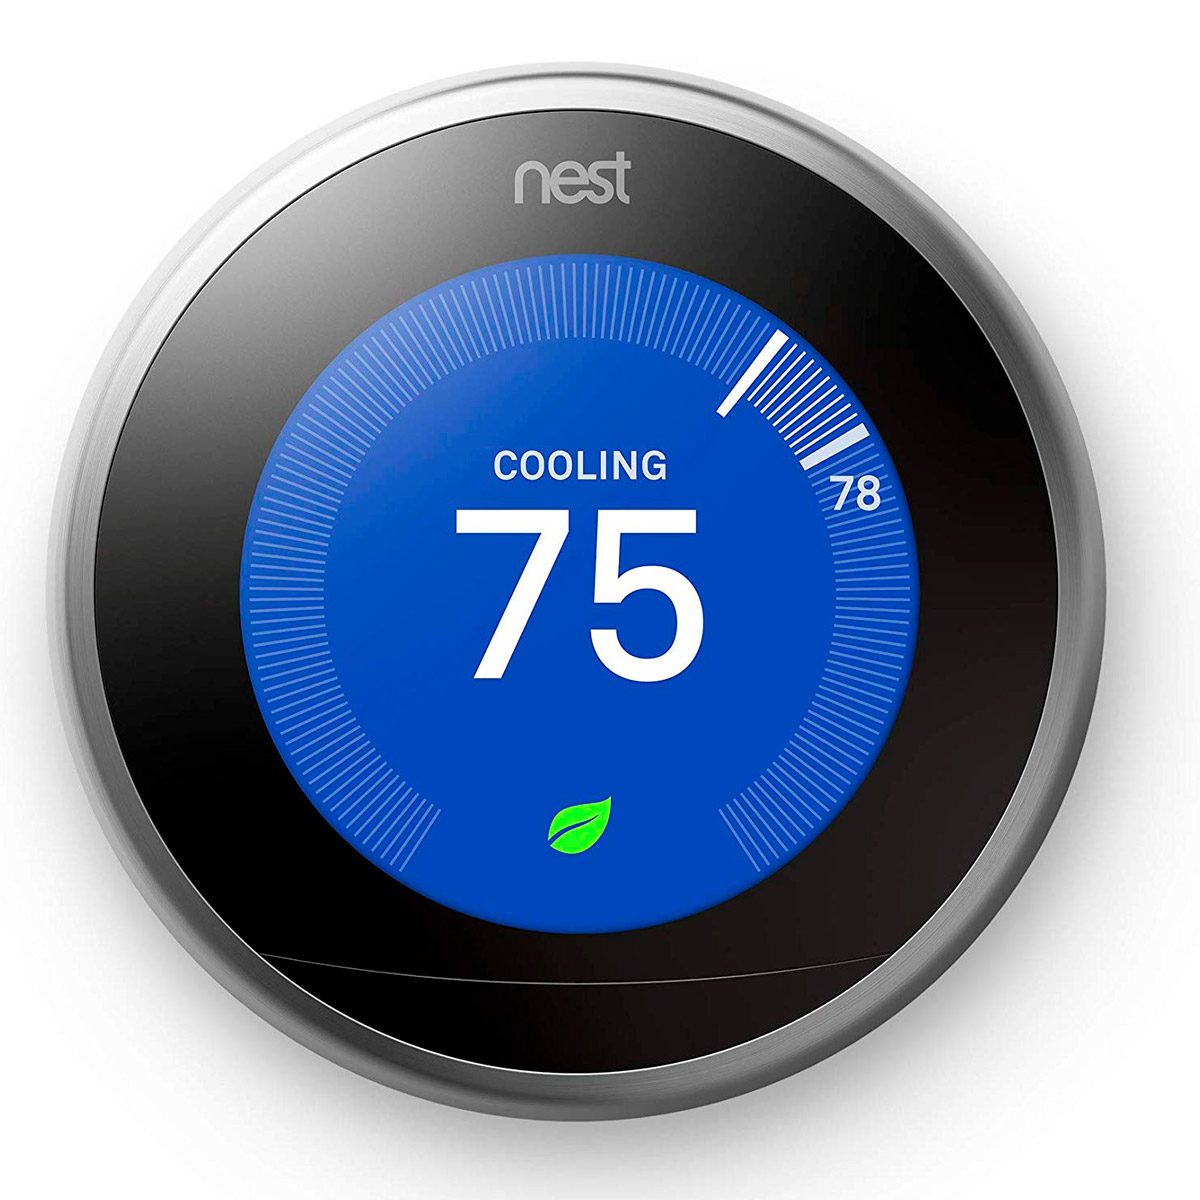 These Google and Nest devices work with Matter